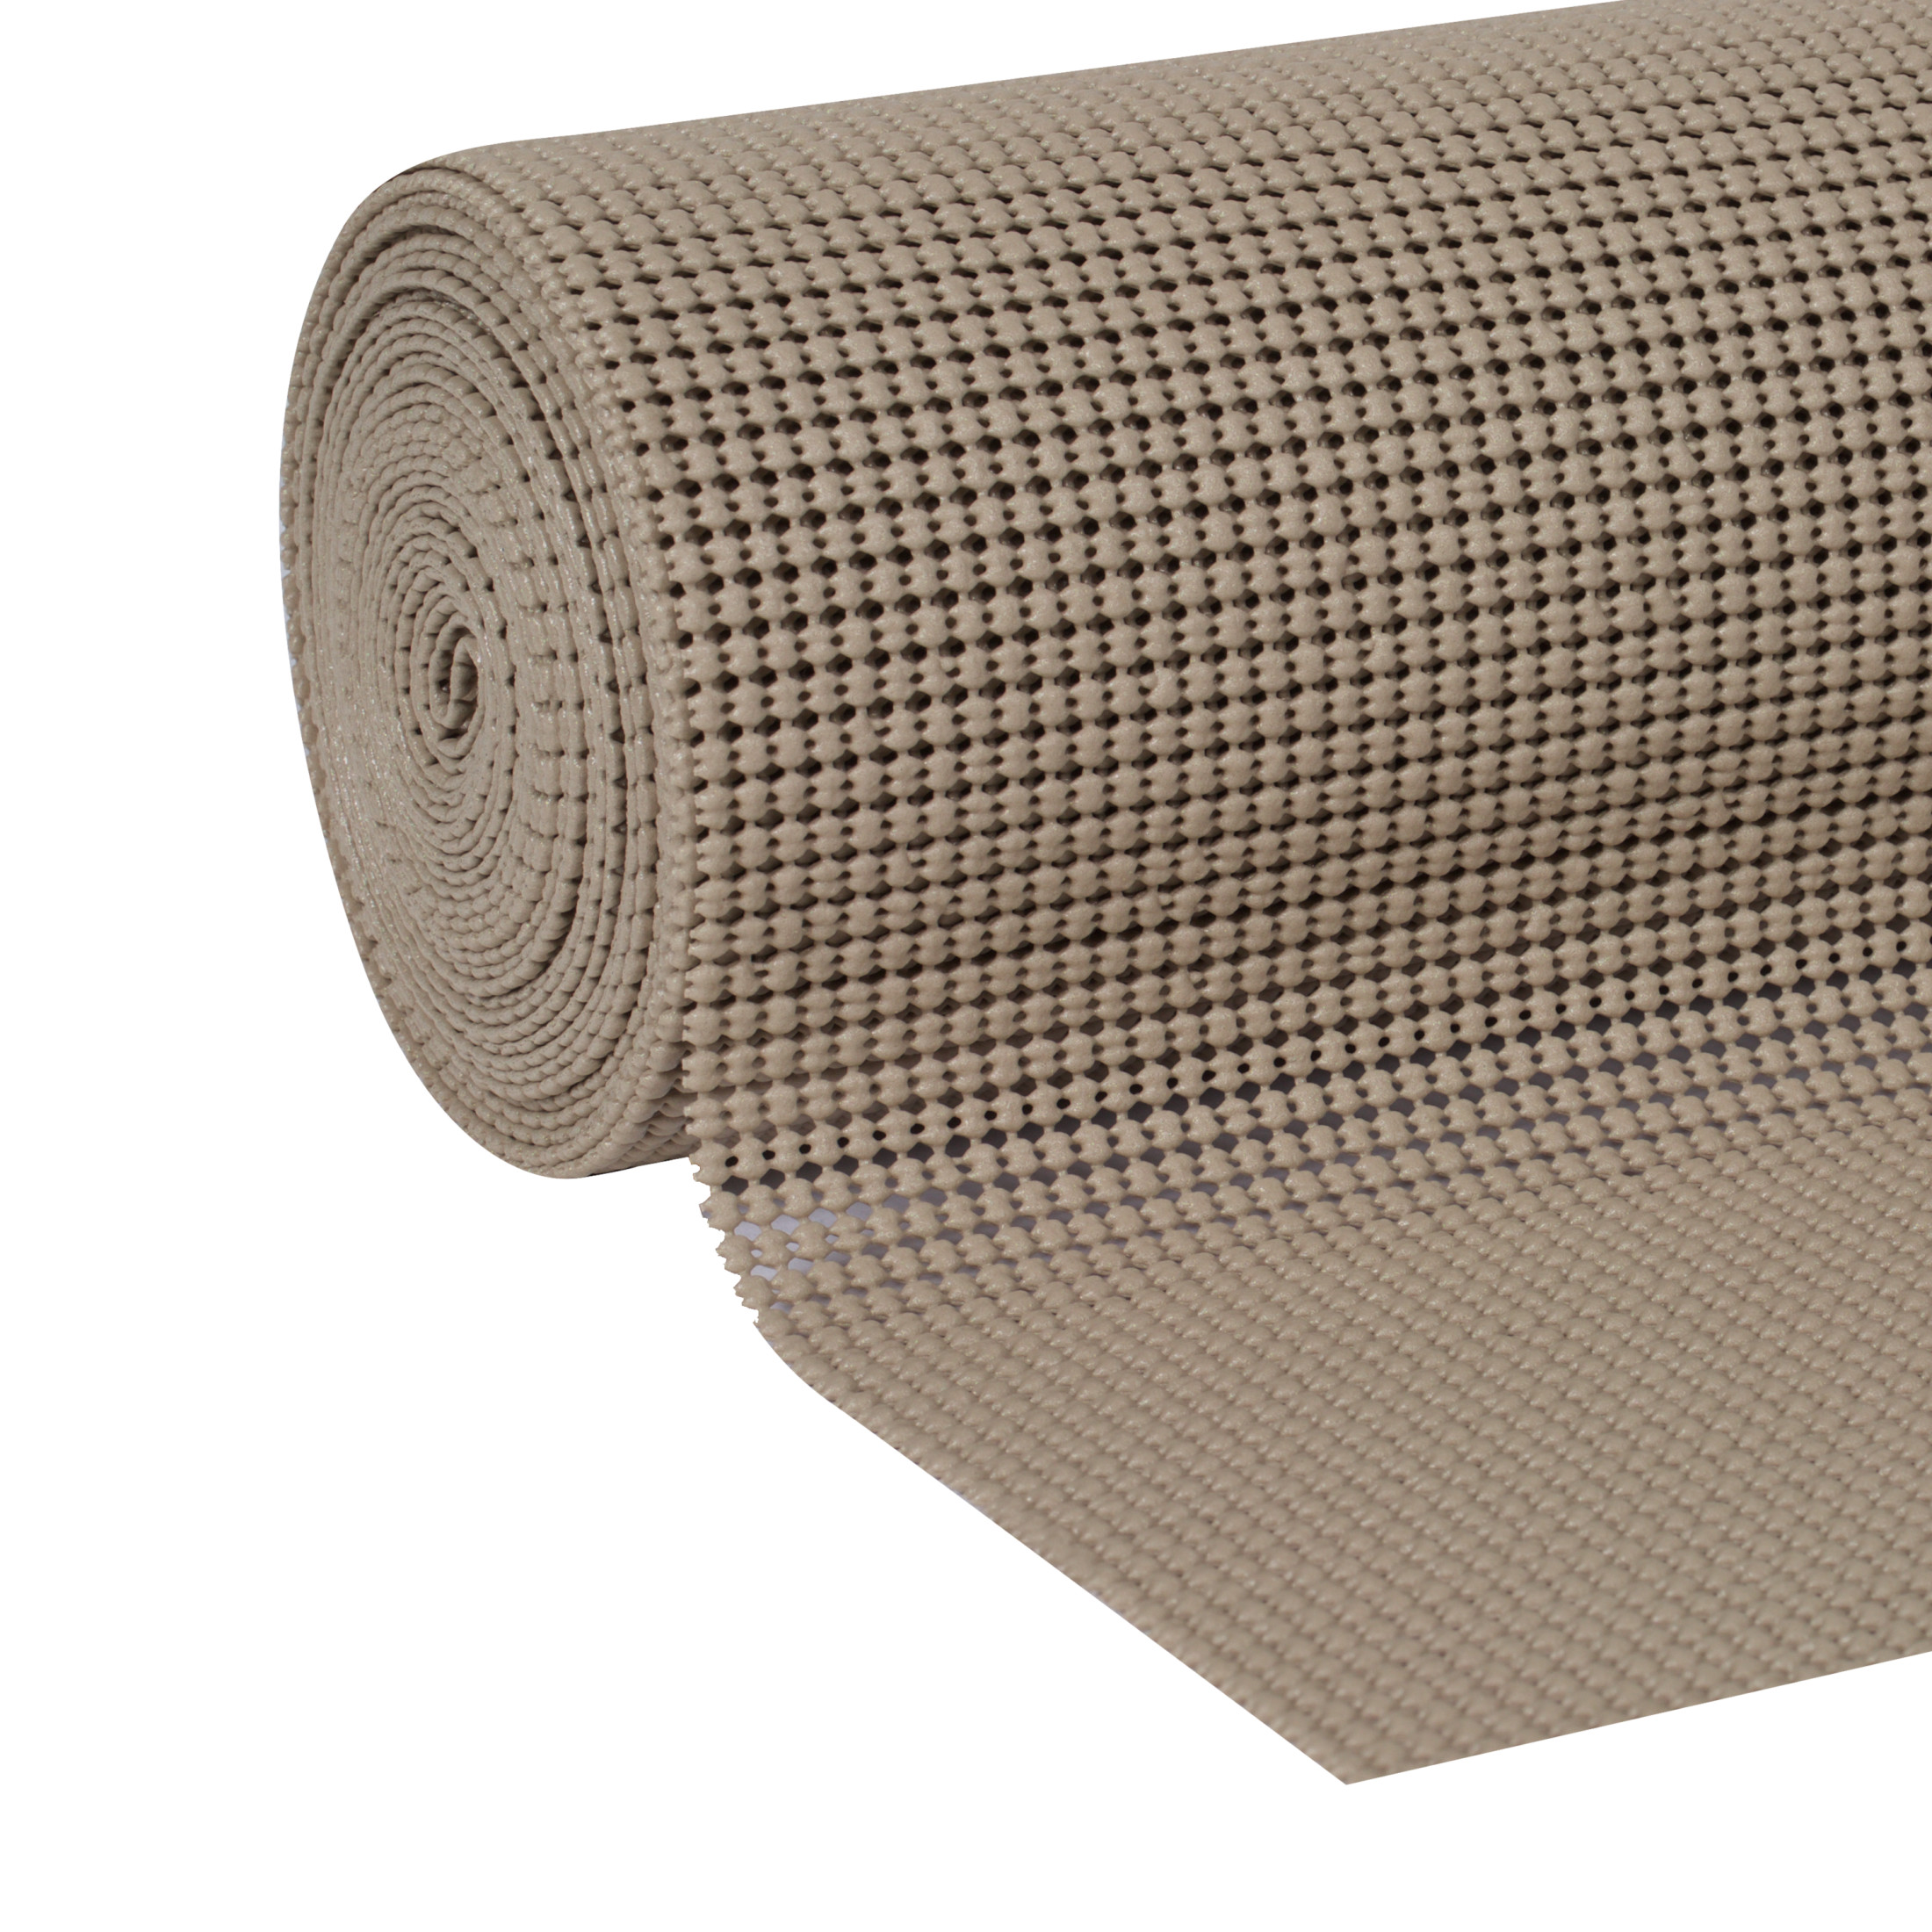 EasyLiner Select Grip Shelf Liner, Taupe, 12 in. x 20 ft. Roll - image 1 of 11